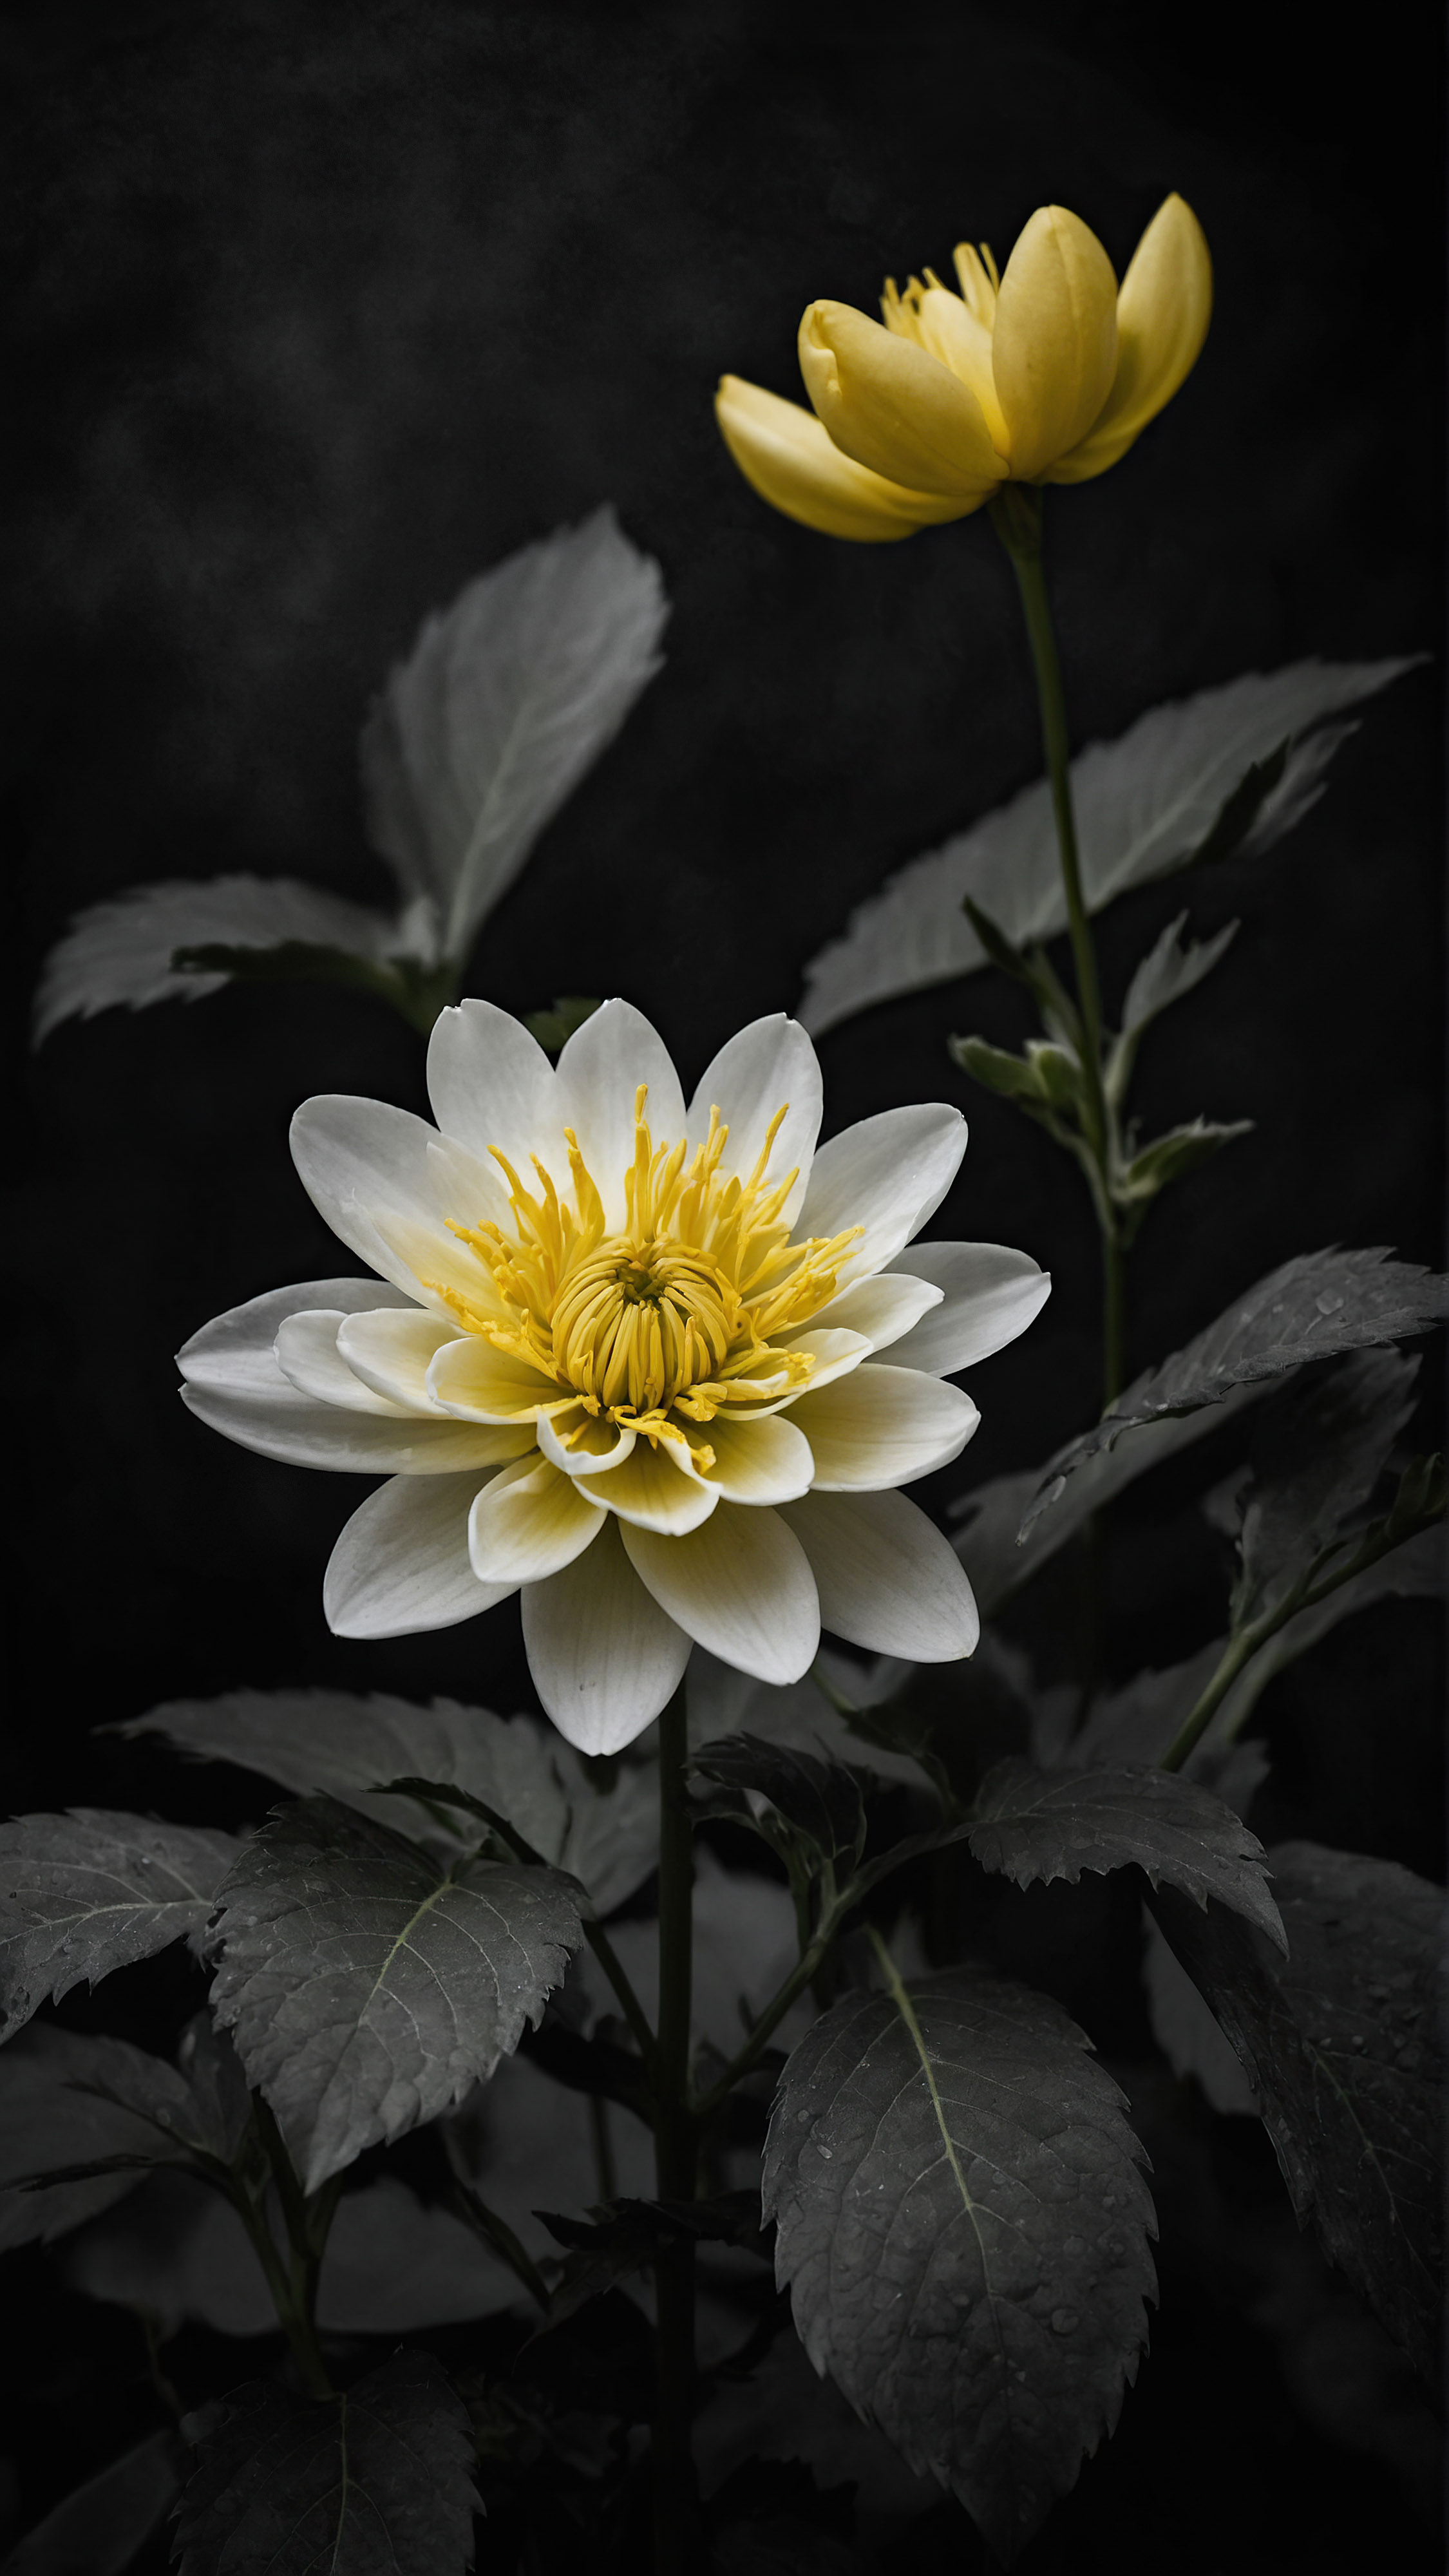 Admire the delicate beauty with a cute black iPhone wallpaper, showcasing a blooming flower with delicate yellow and white petals, beautifully detailed against a dark background.